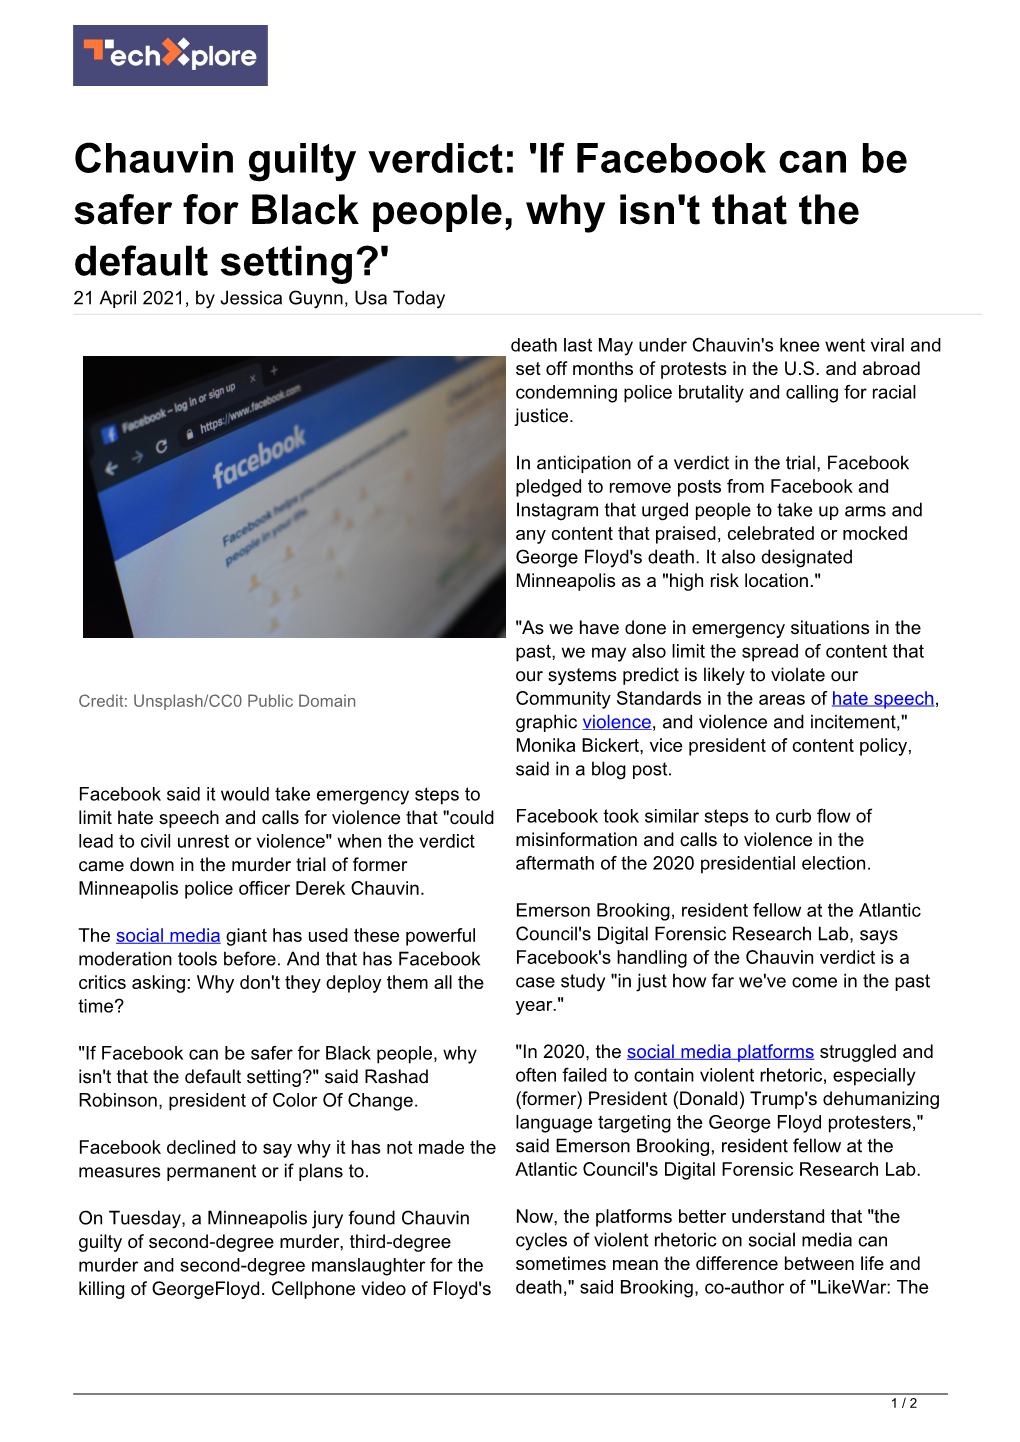 Chauvin Guilty Verdict: 'If Facebook Can Be Safer for Black People, Why Isn't That the Default Setting?' 21 April 2021, by Jessica Guynn, Usa Today